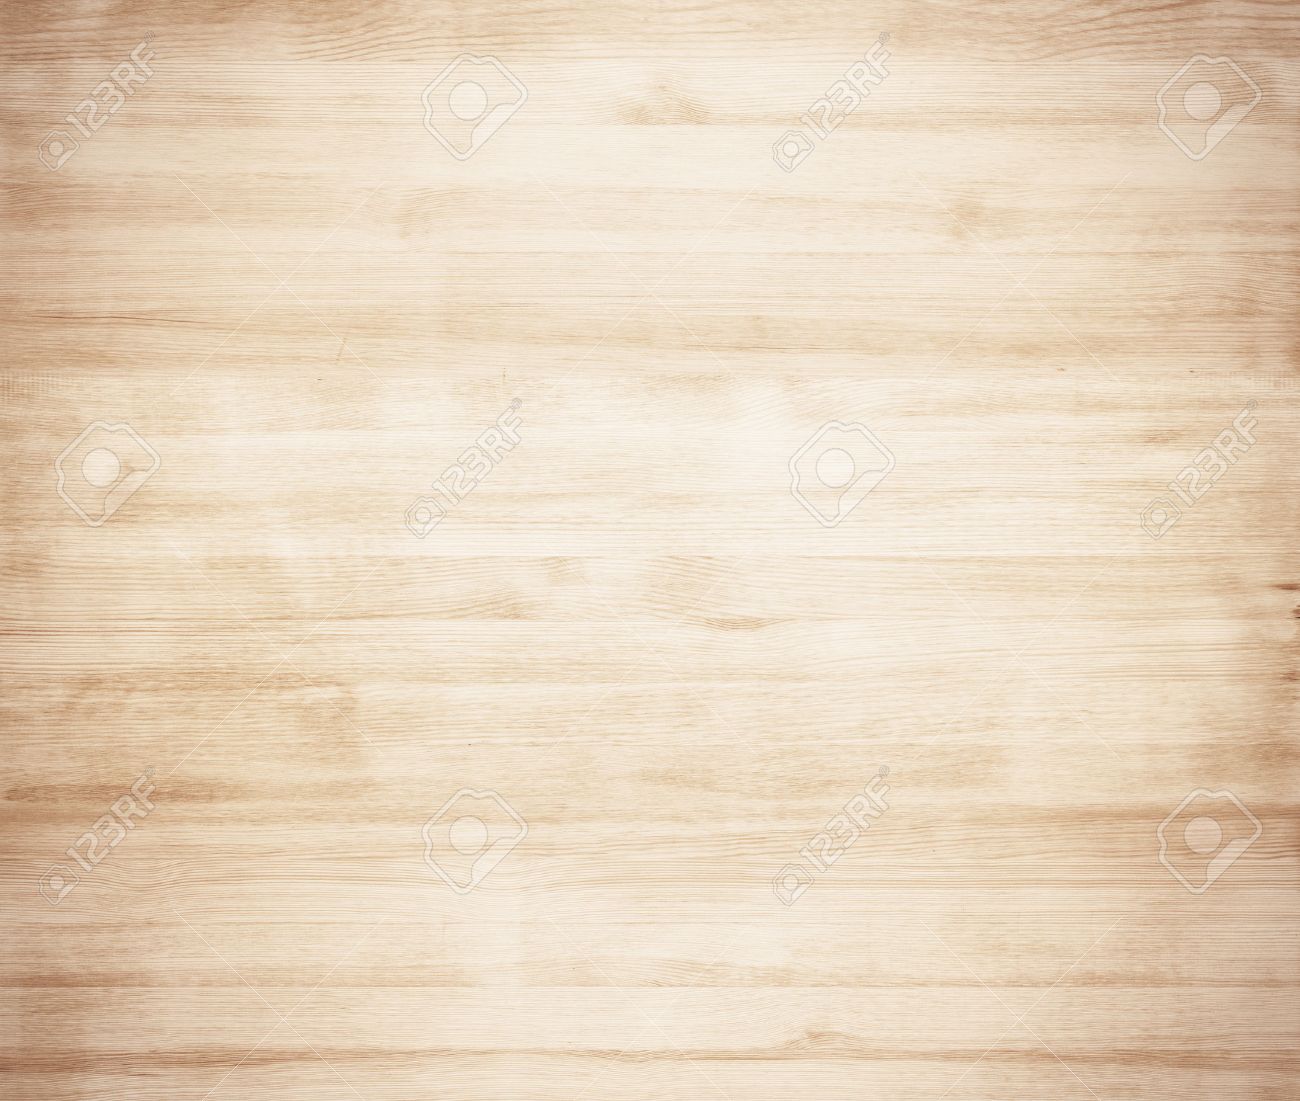 Soft Wooden Texture Empty Wood Background Stock Photo Picture